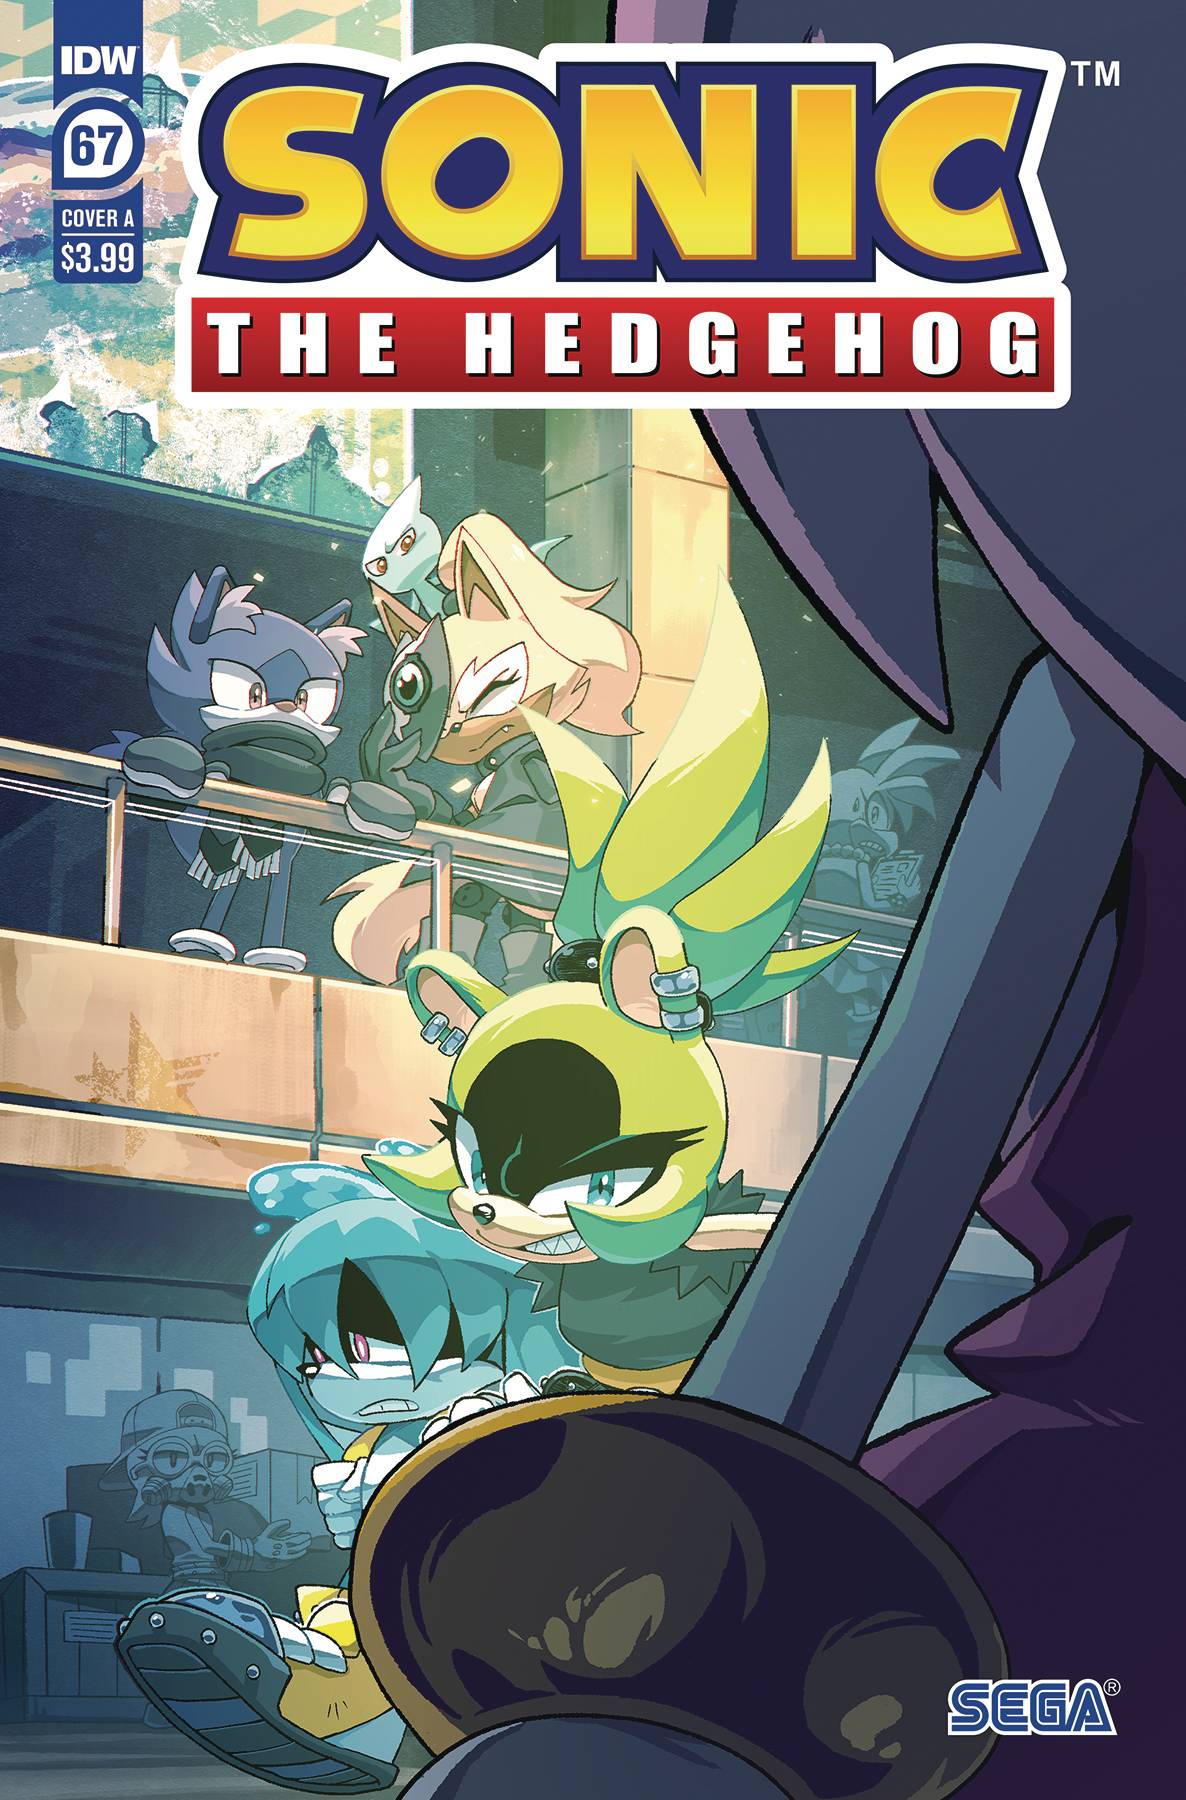 Today's Comic> Sonic the Hedgehog #222